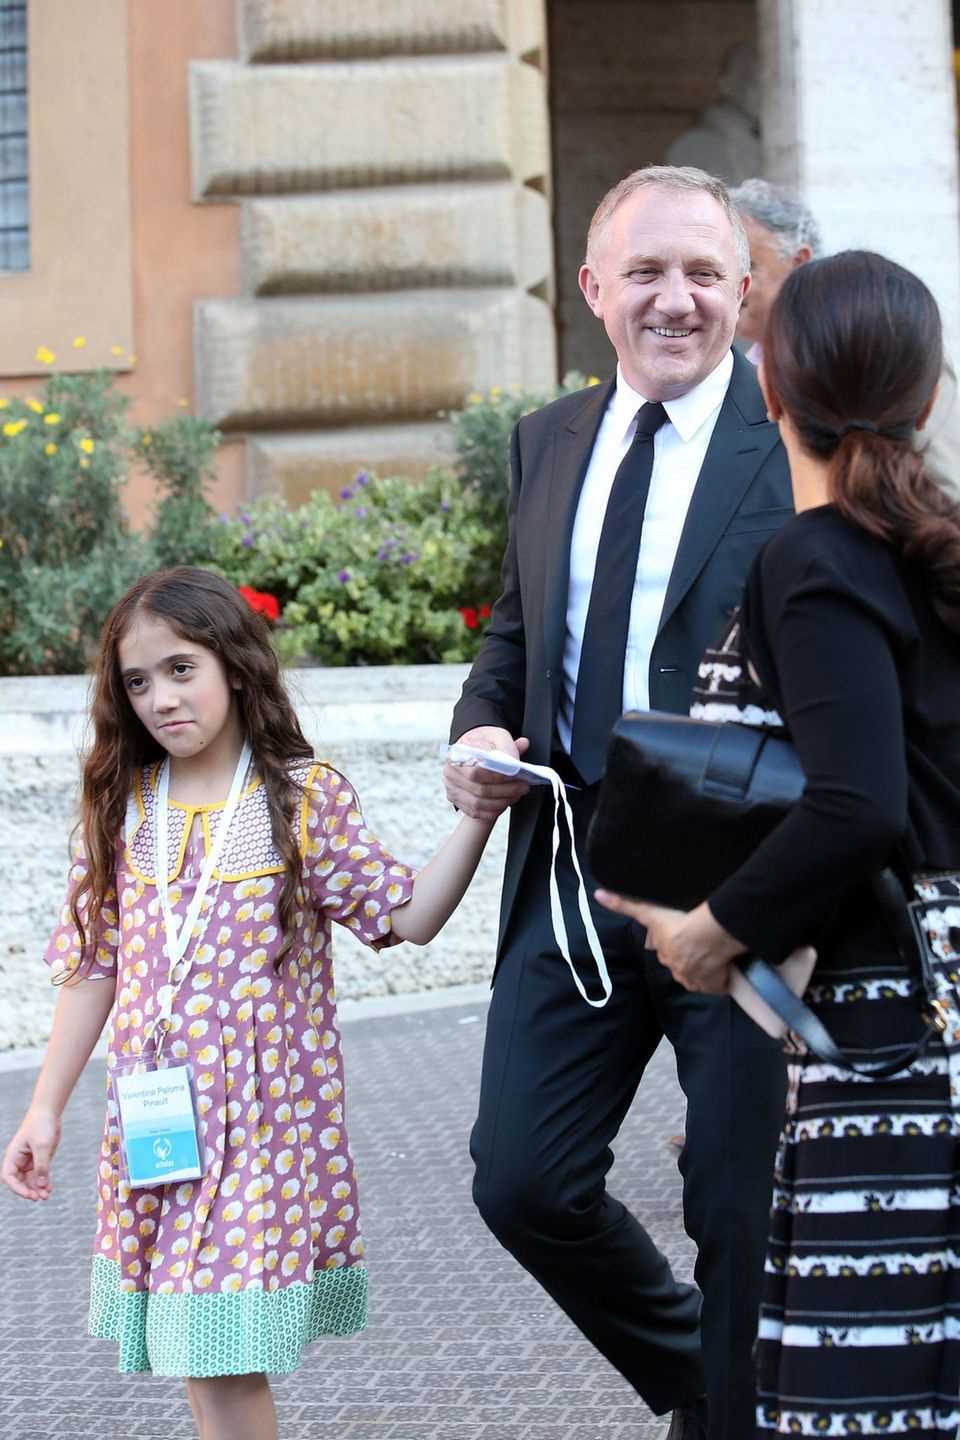 Paloma with her parents Francois-Henri Pinault and Salma Hayek in Rome in the summer of 2016.